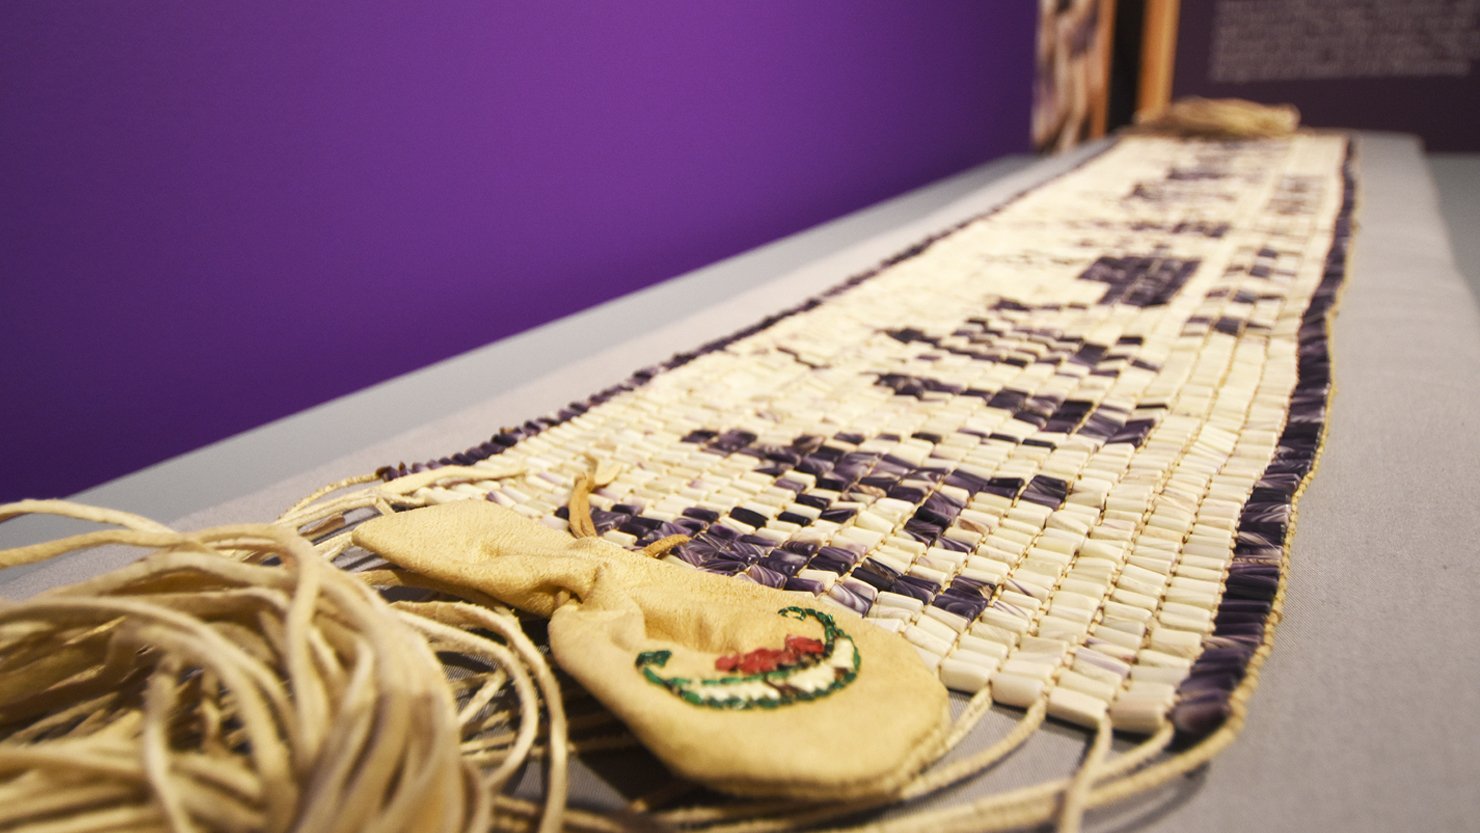 Wampum belt on display at The Box, Plymouth